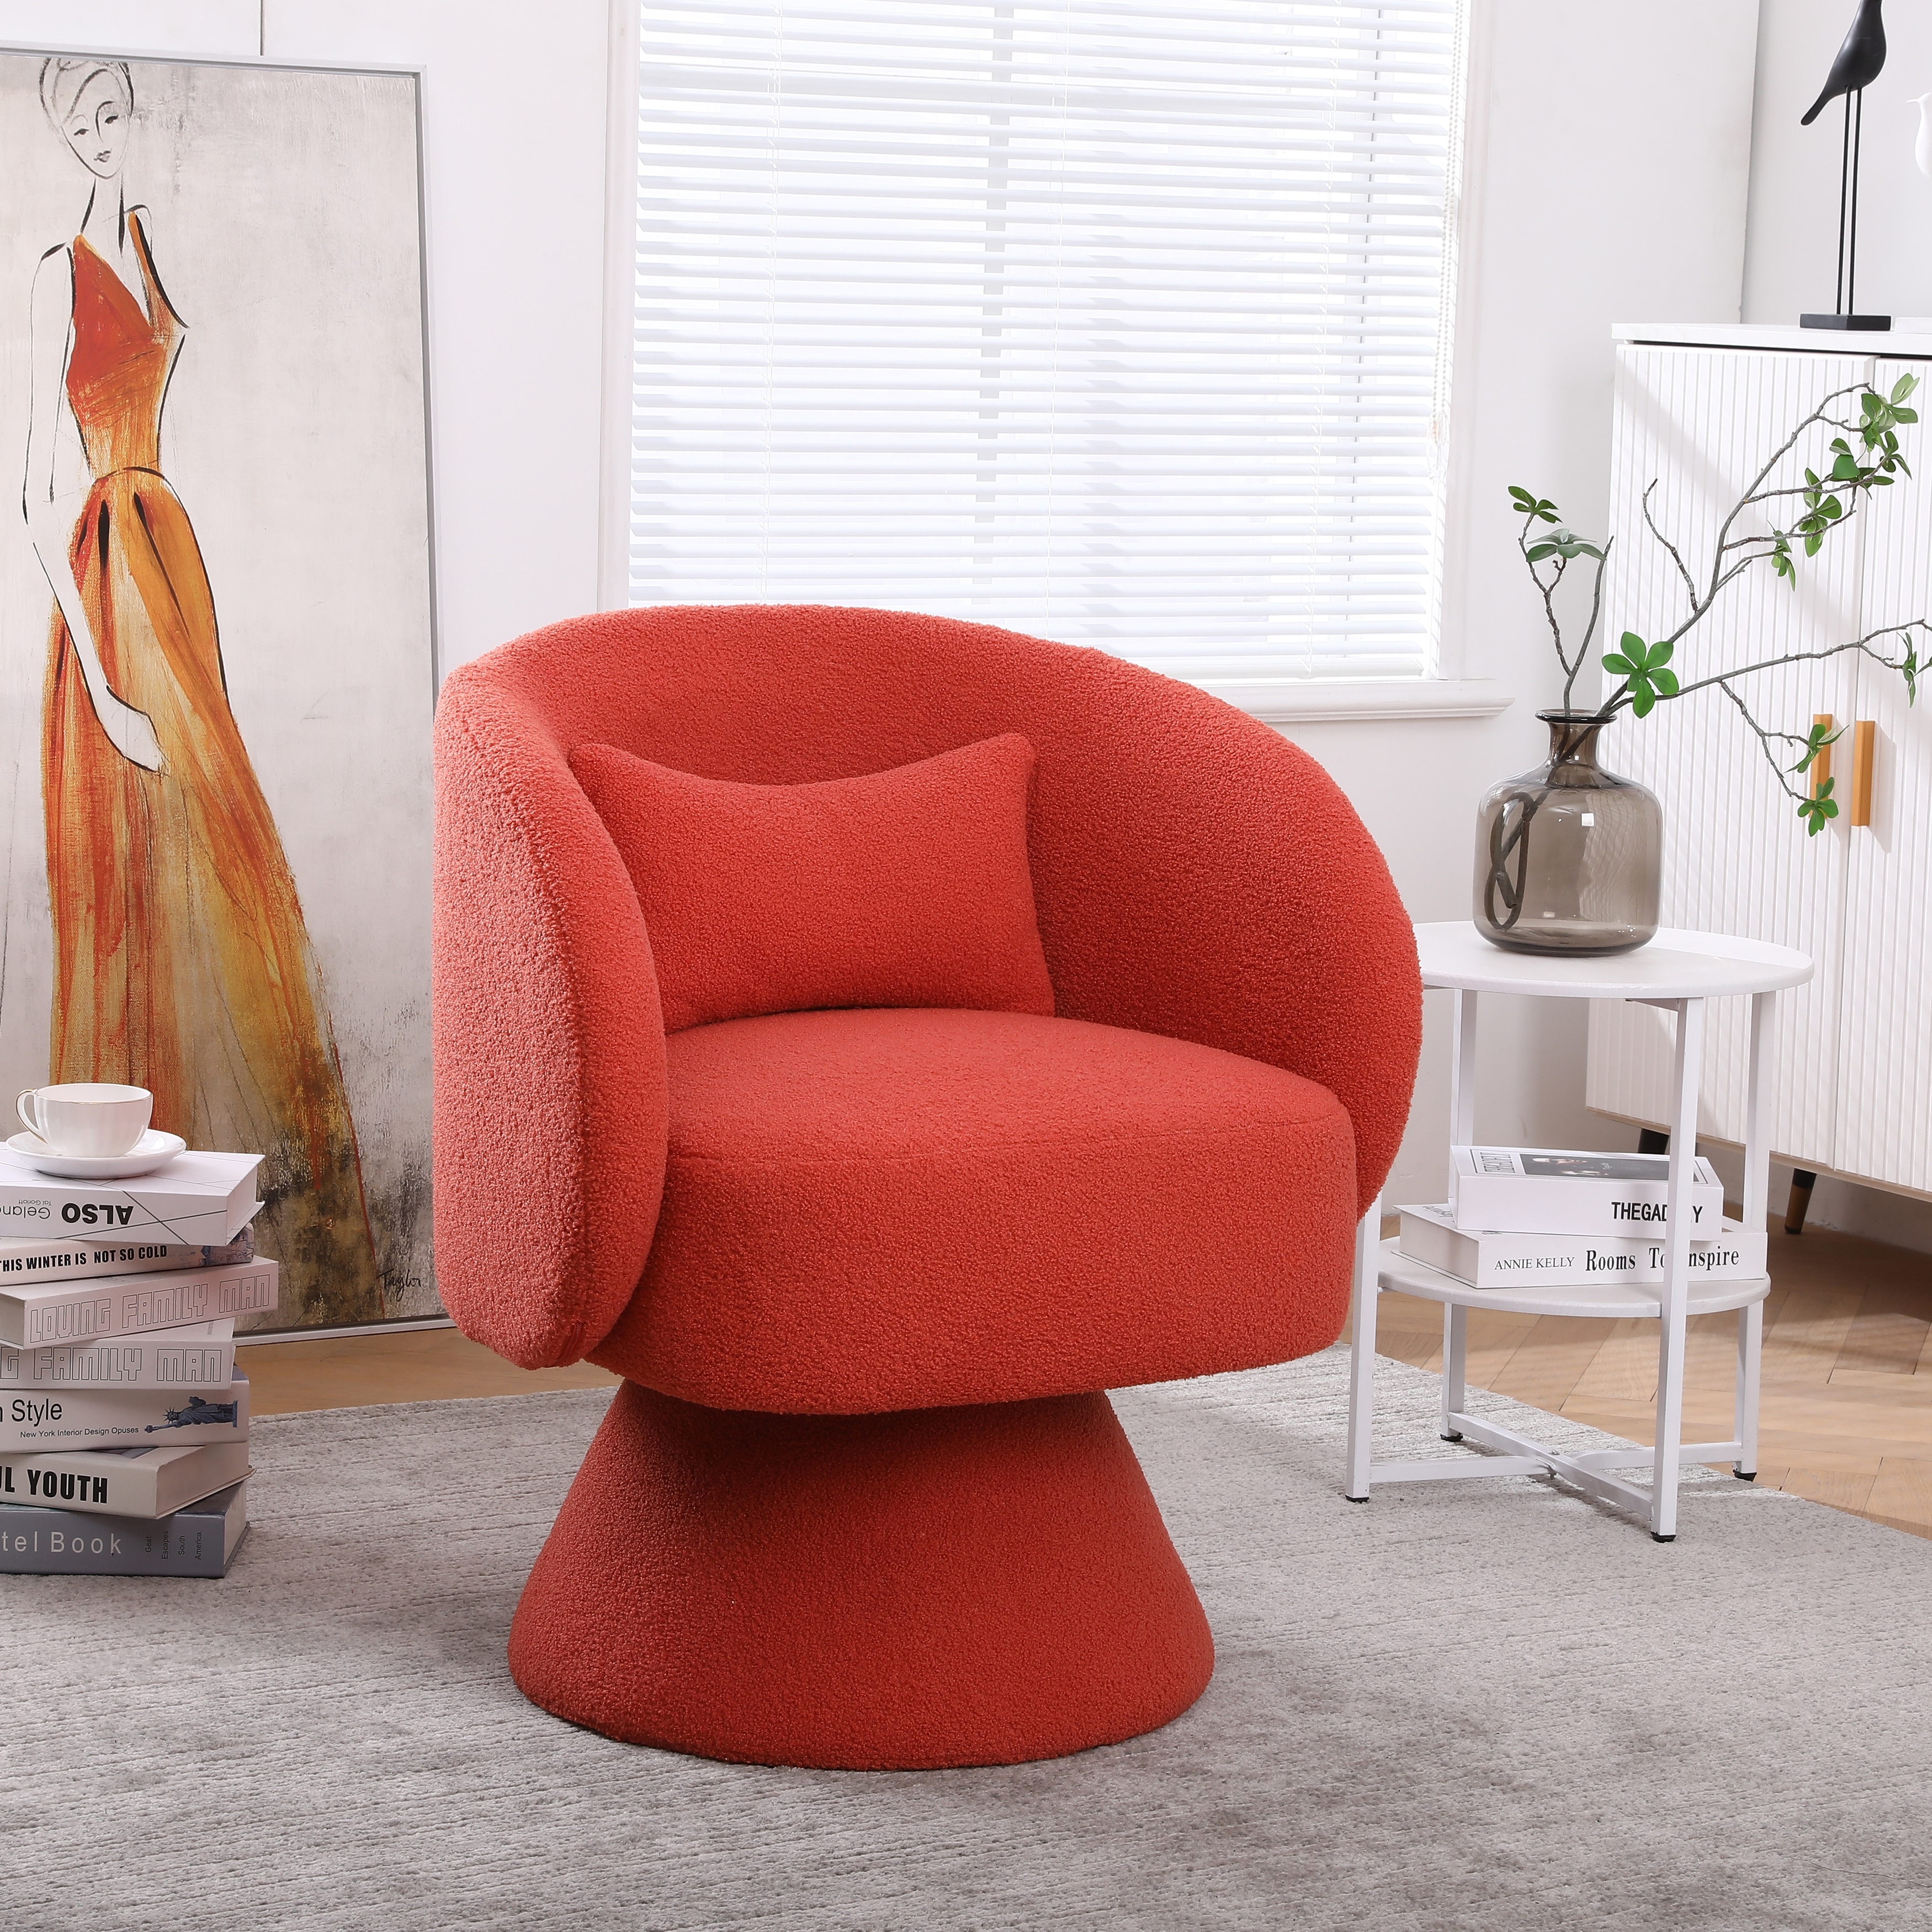 https://ak1.ostkcdn.com/images/products/is/images/direct/57080eb7e973662ccadcaaaf60820354b0707957/Modern-Accent-Chair-Swivel-Armchair%2C-Round-Fabric-Barrel-Chairs-Single-Sofa-Lounge-Chair-with-Small-Pillow-for-Living-Room.jpg